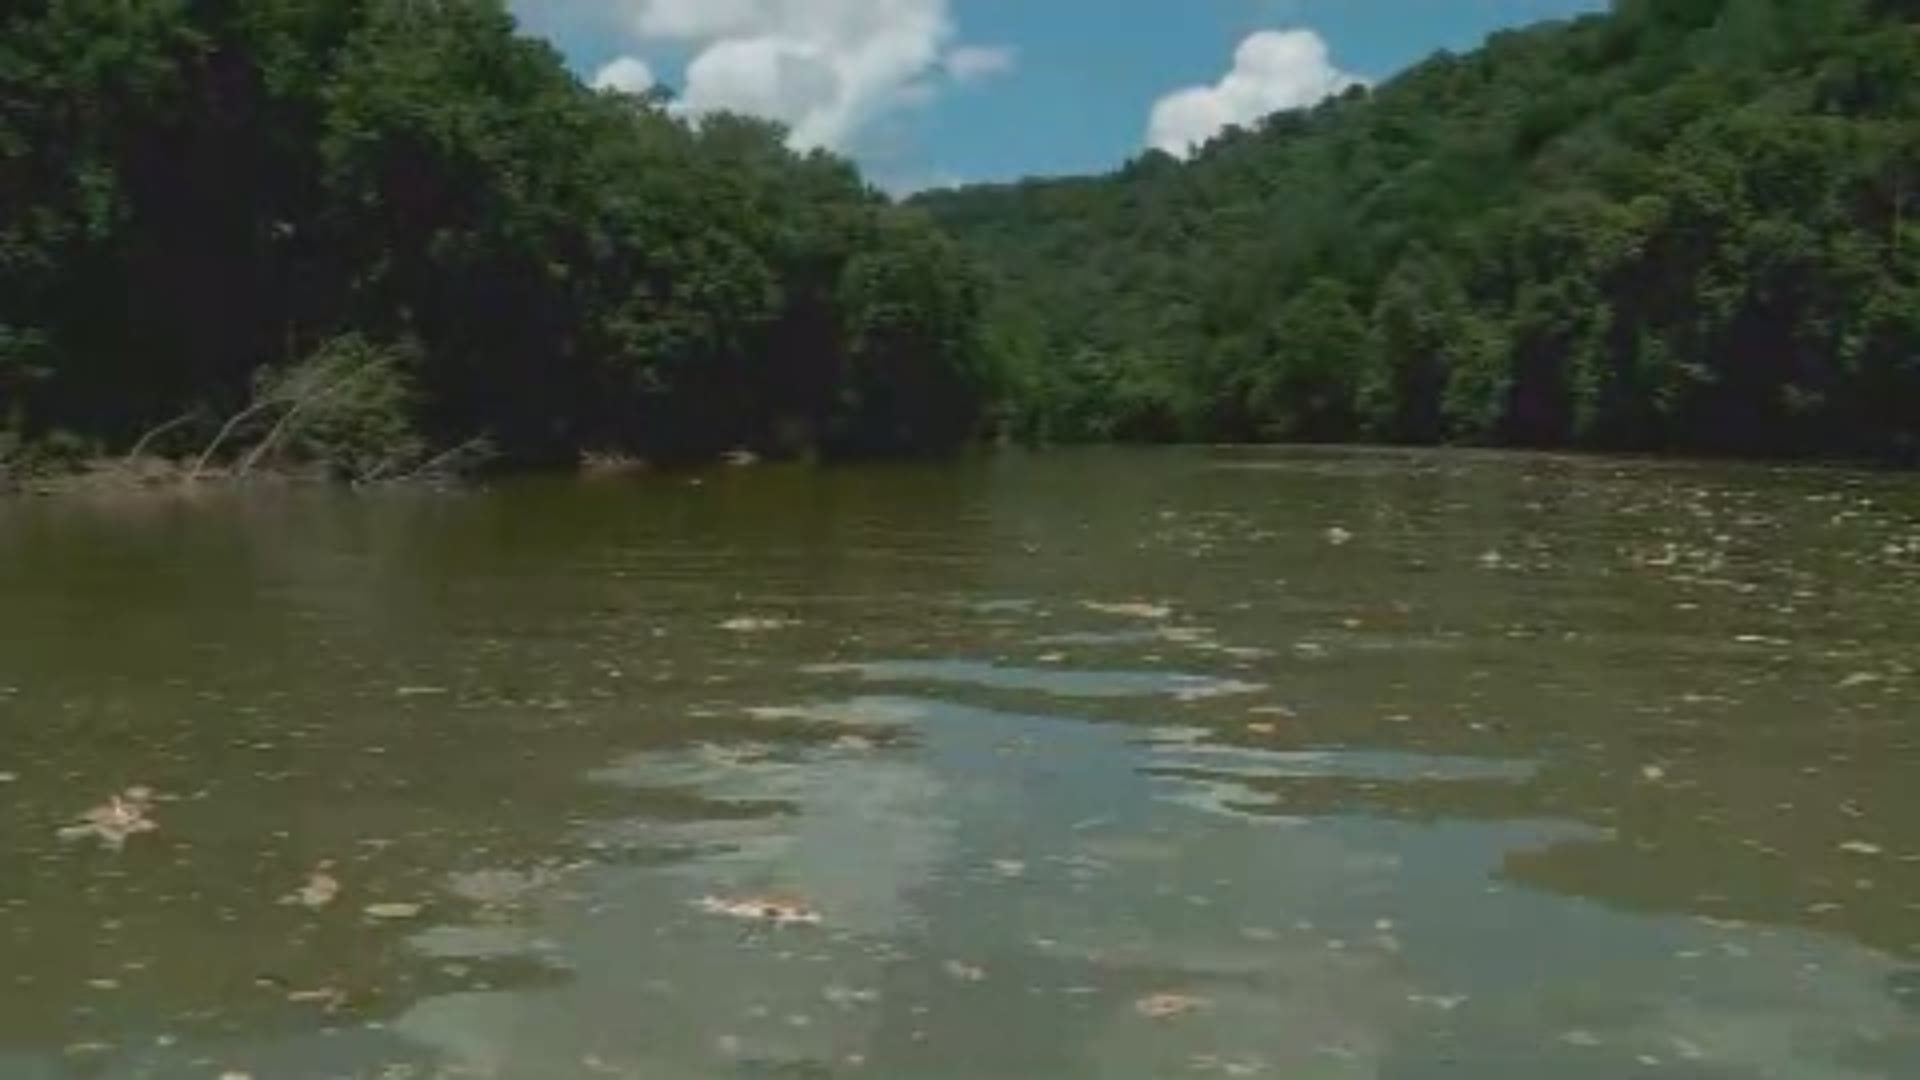 Thousands of fish are dead in the river which state environmental officials said would likely happen.